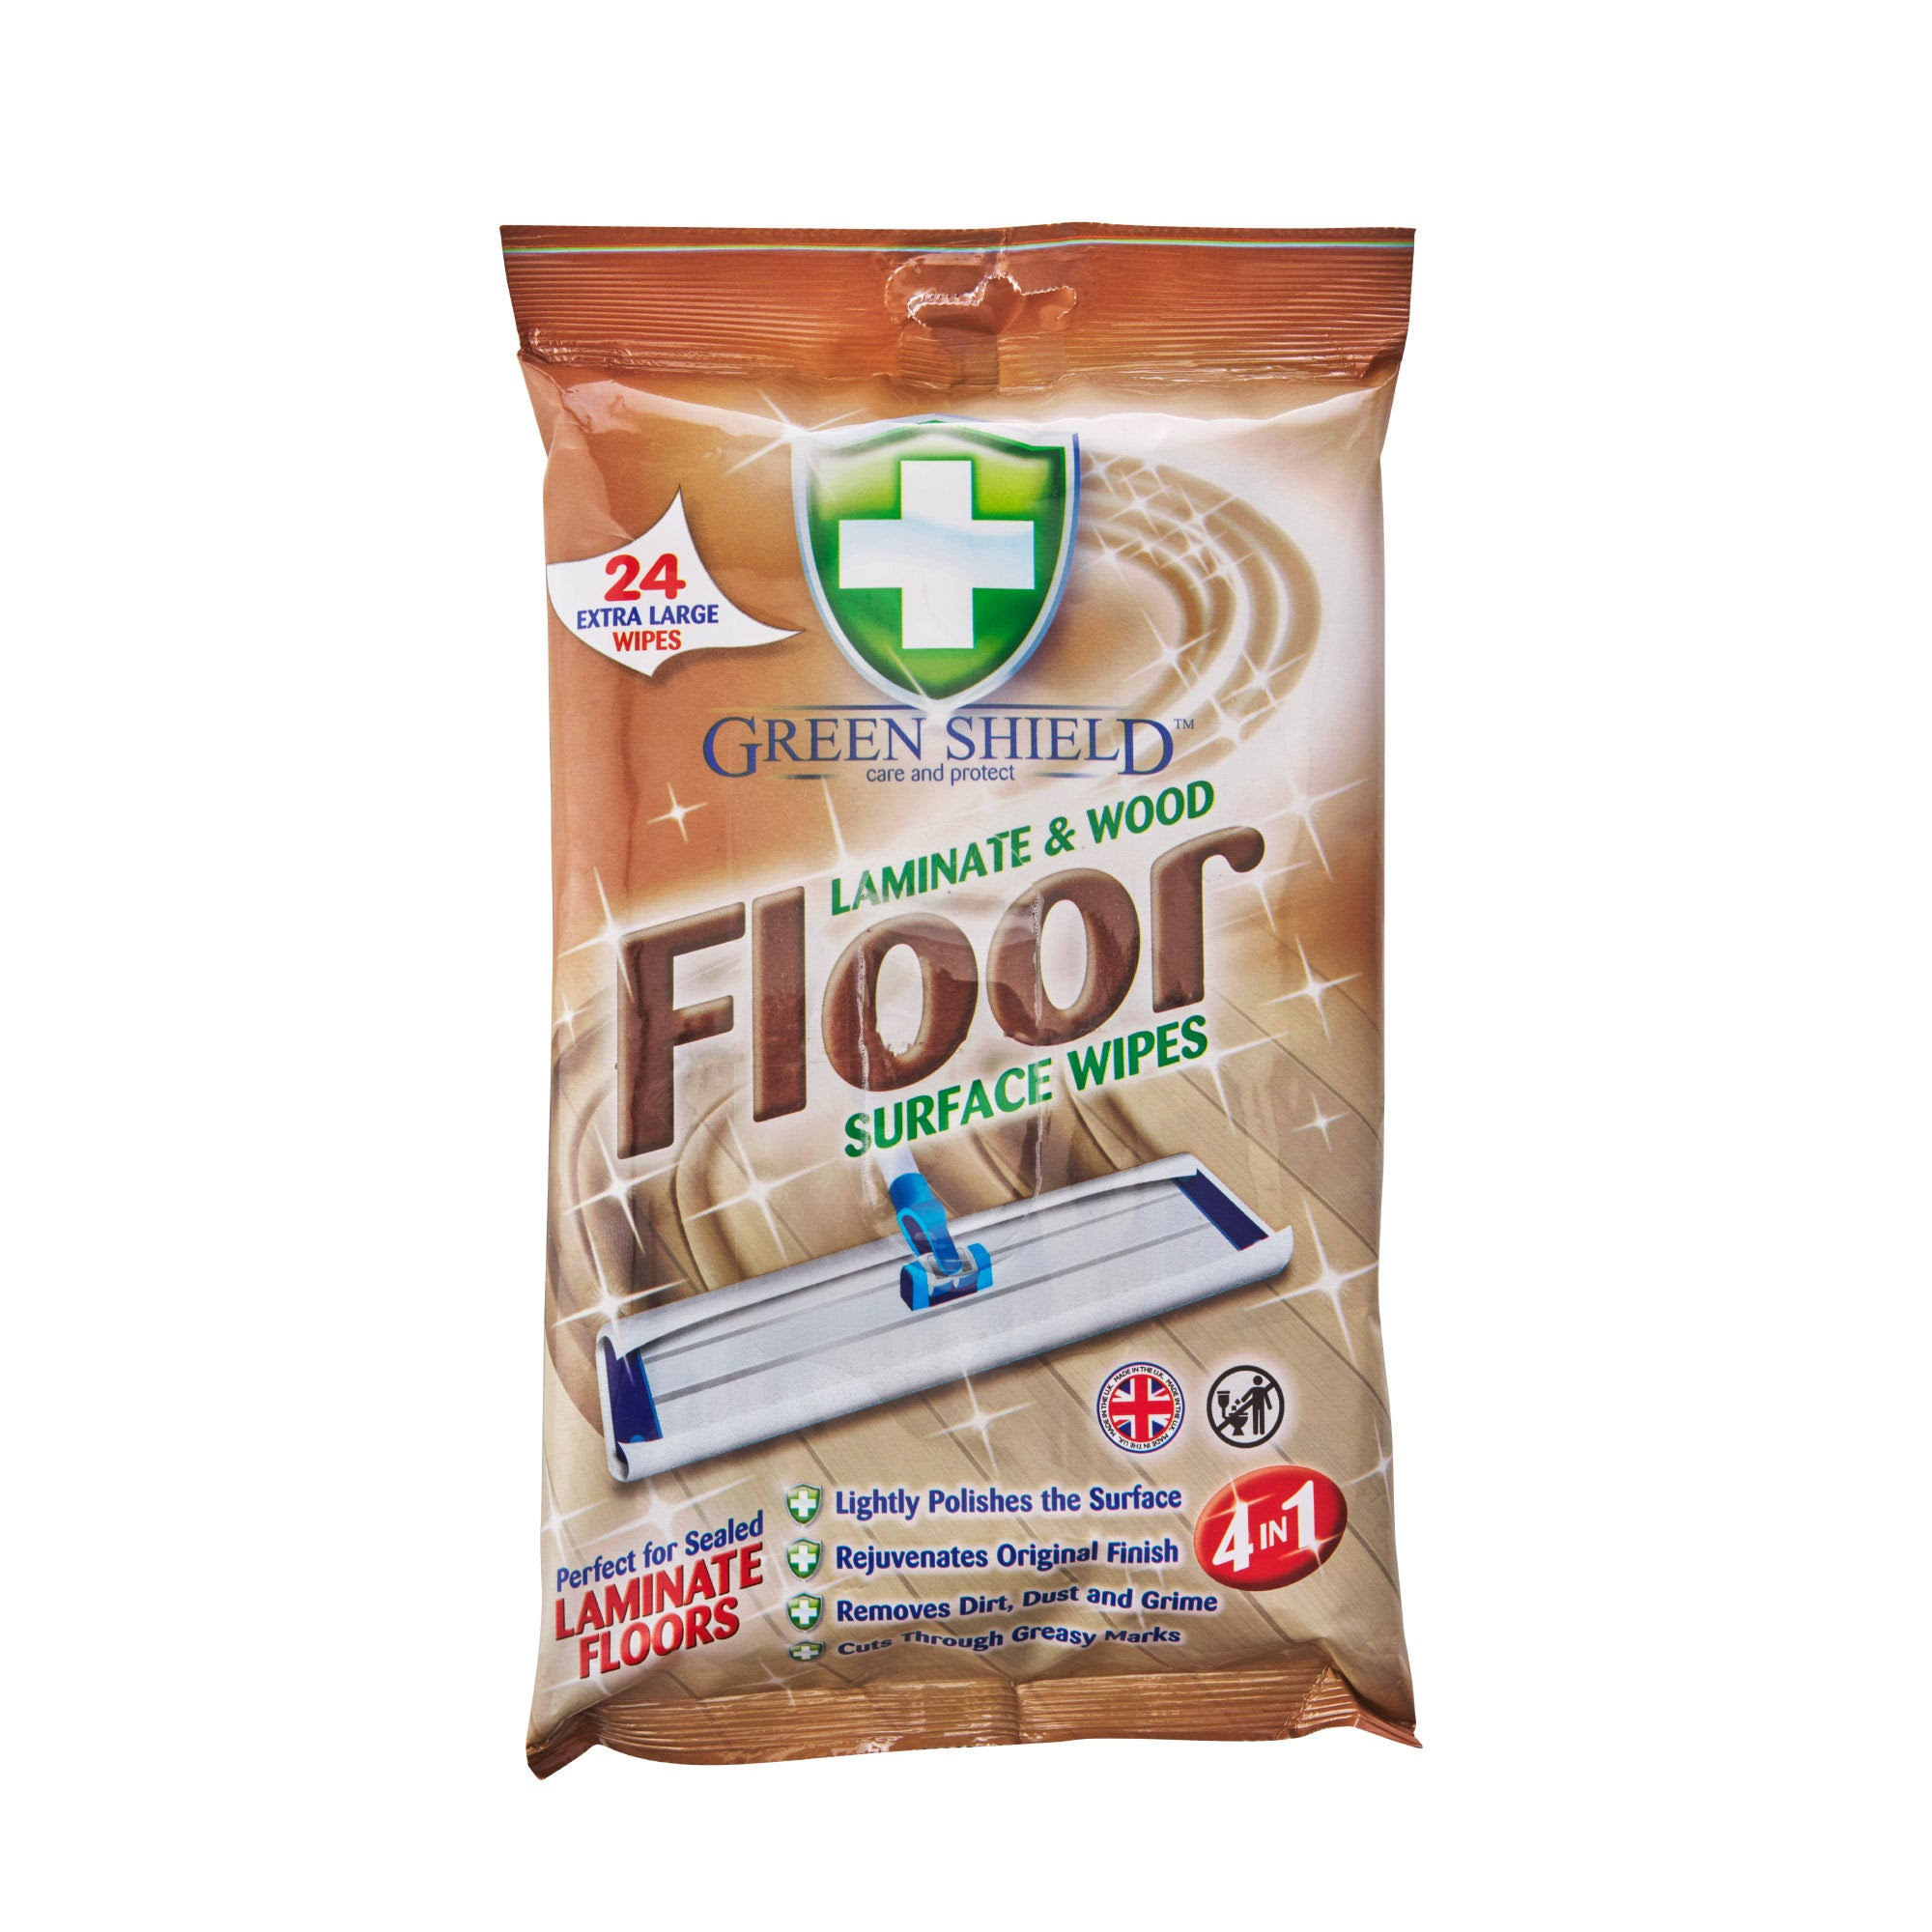 Green Shield Laminate & Wood Floor Extra Large Surface Wipes 24pk